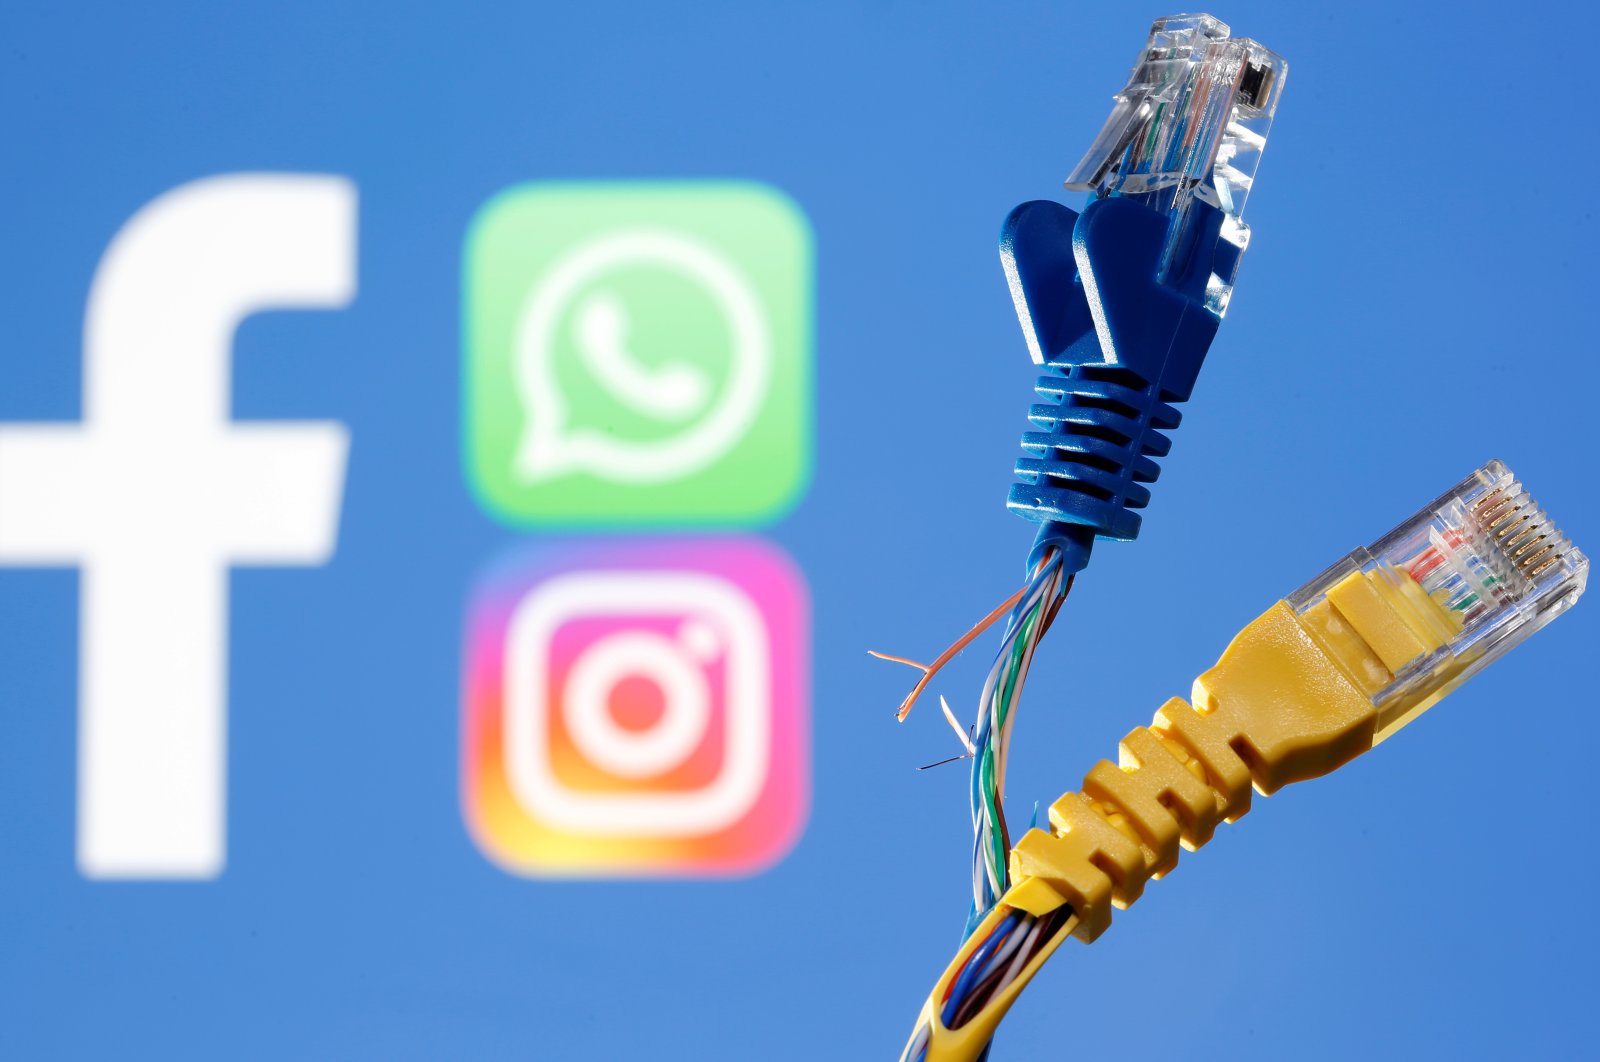 Broken ethernet cables are seen in front of the Facebook, WhatsApp and Instagram logos, Oct. 5, 2021. (Reuters Photo)